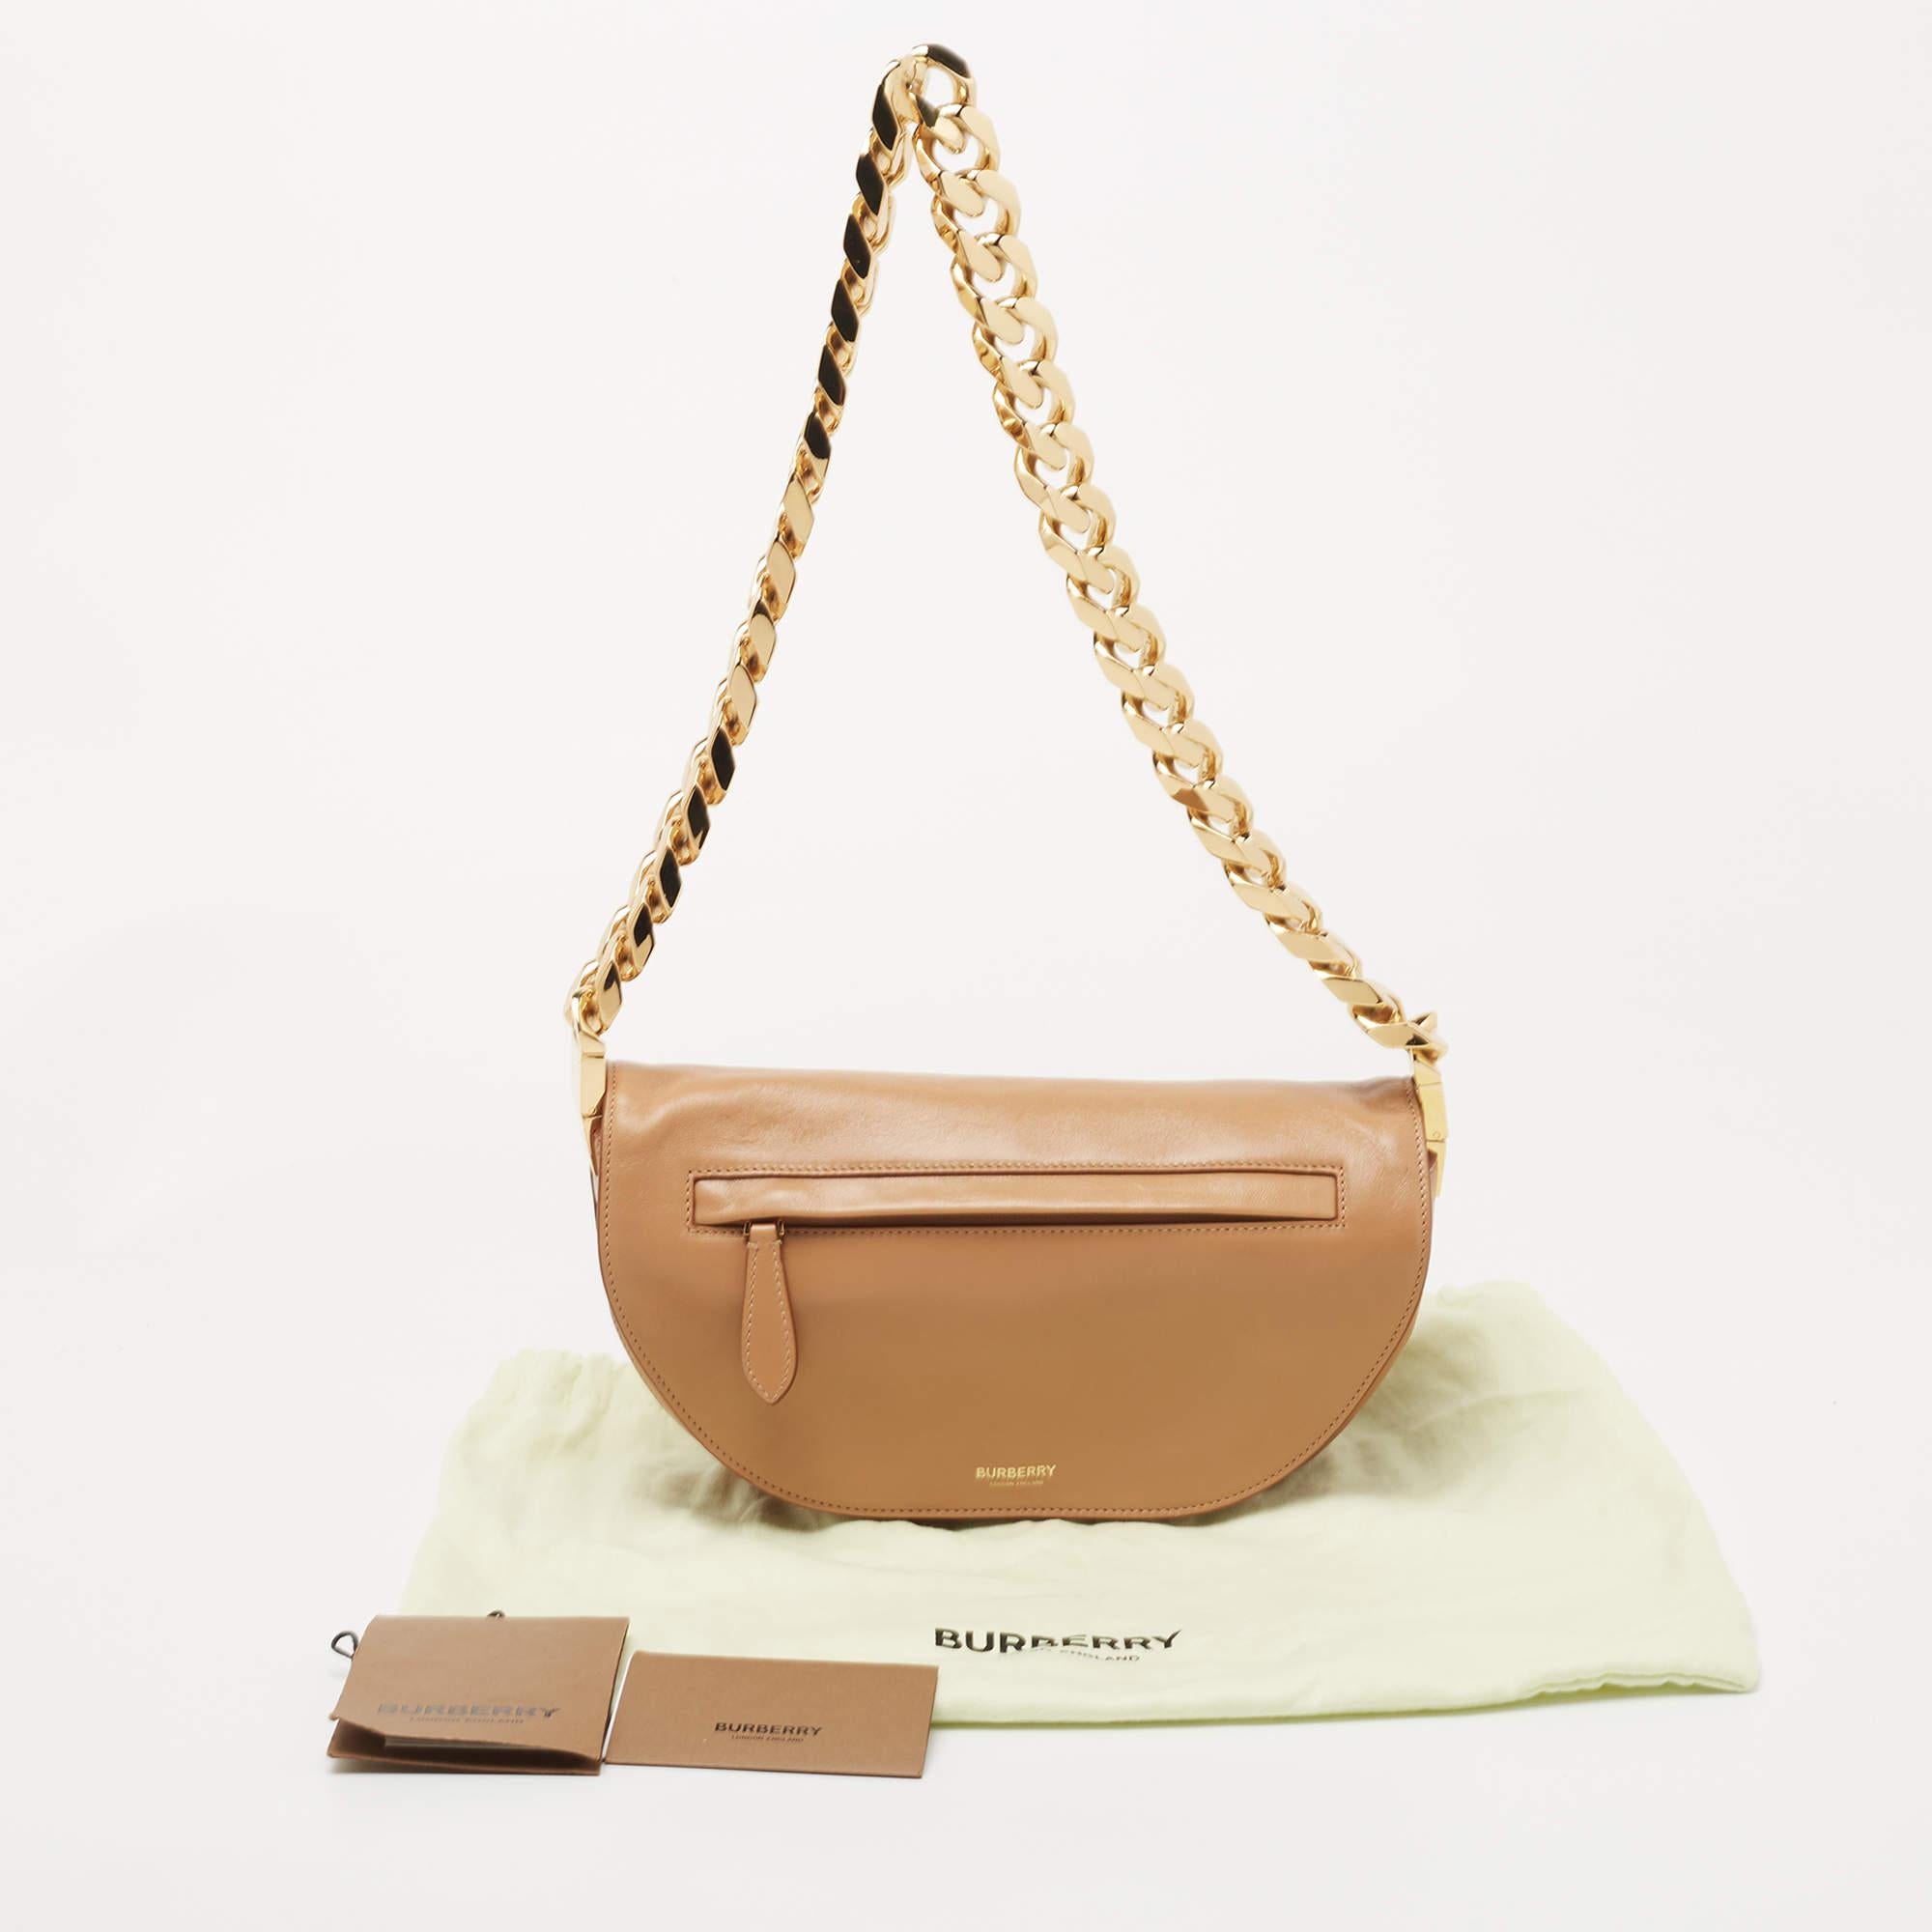 Burberry Beige Soft Leather Small Olympia Shoulder Bag 8